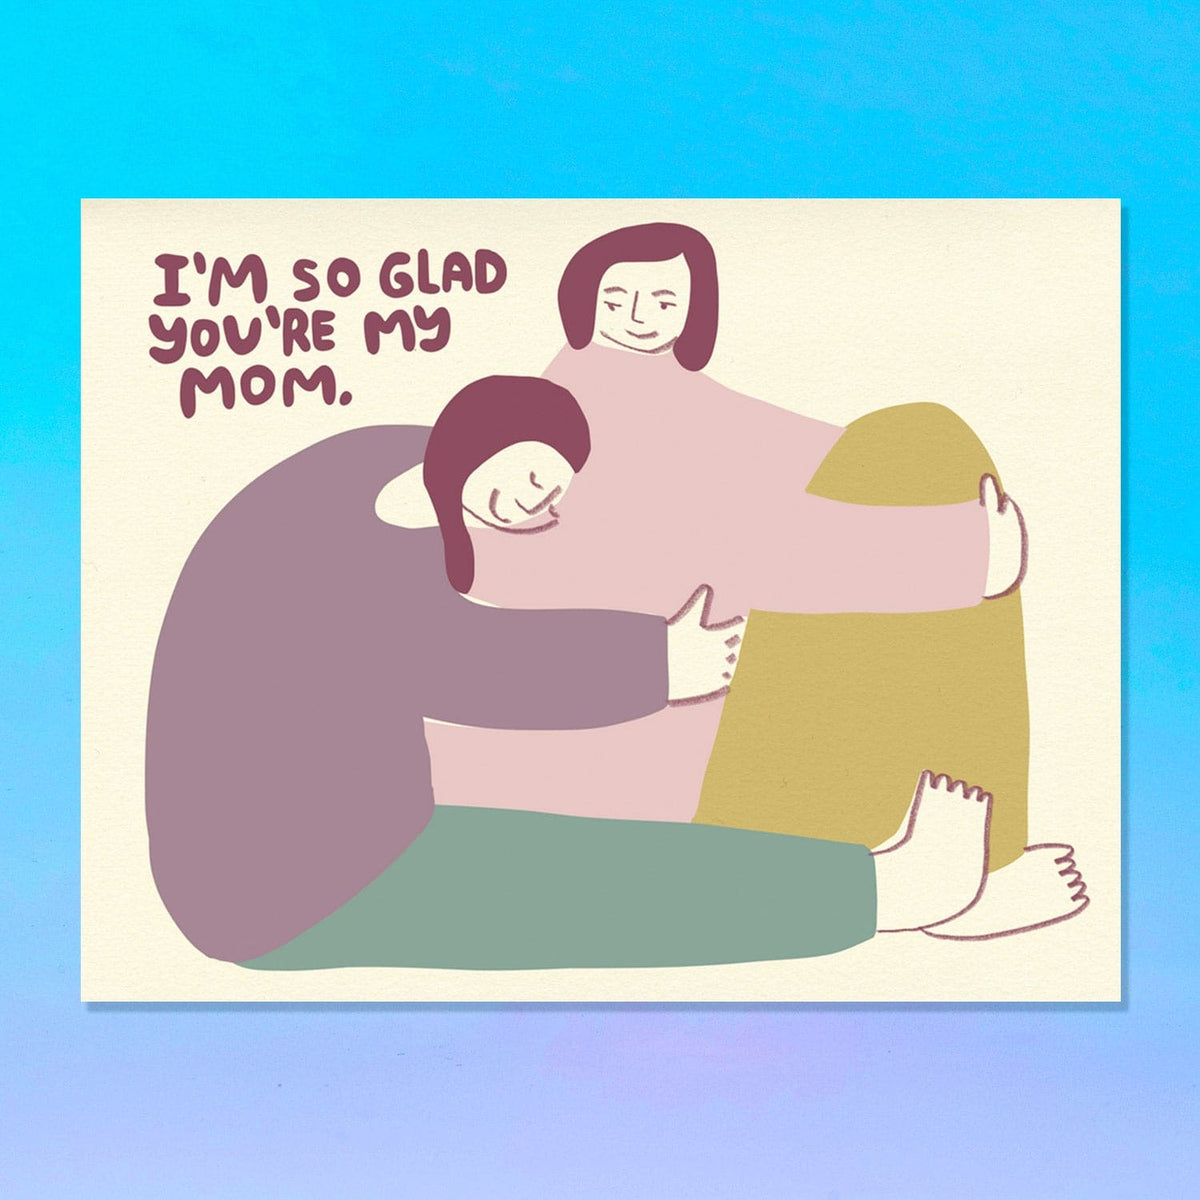 You’re my Mom Greeting Card Dropping soon - Greeting Card - 